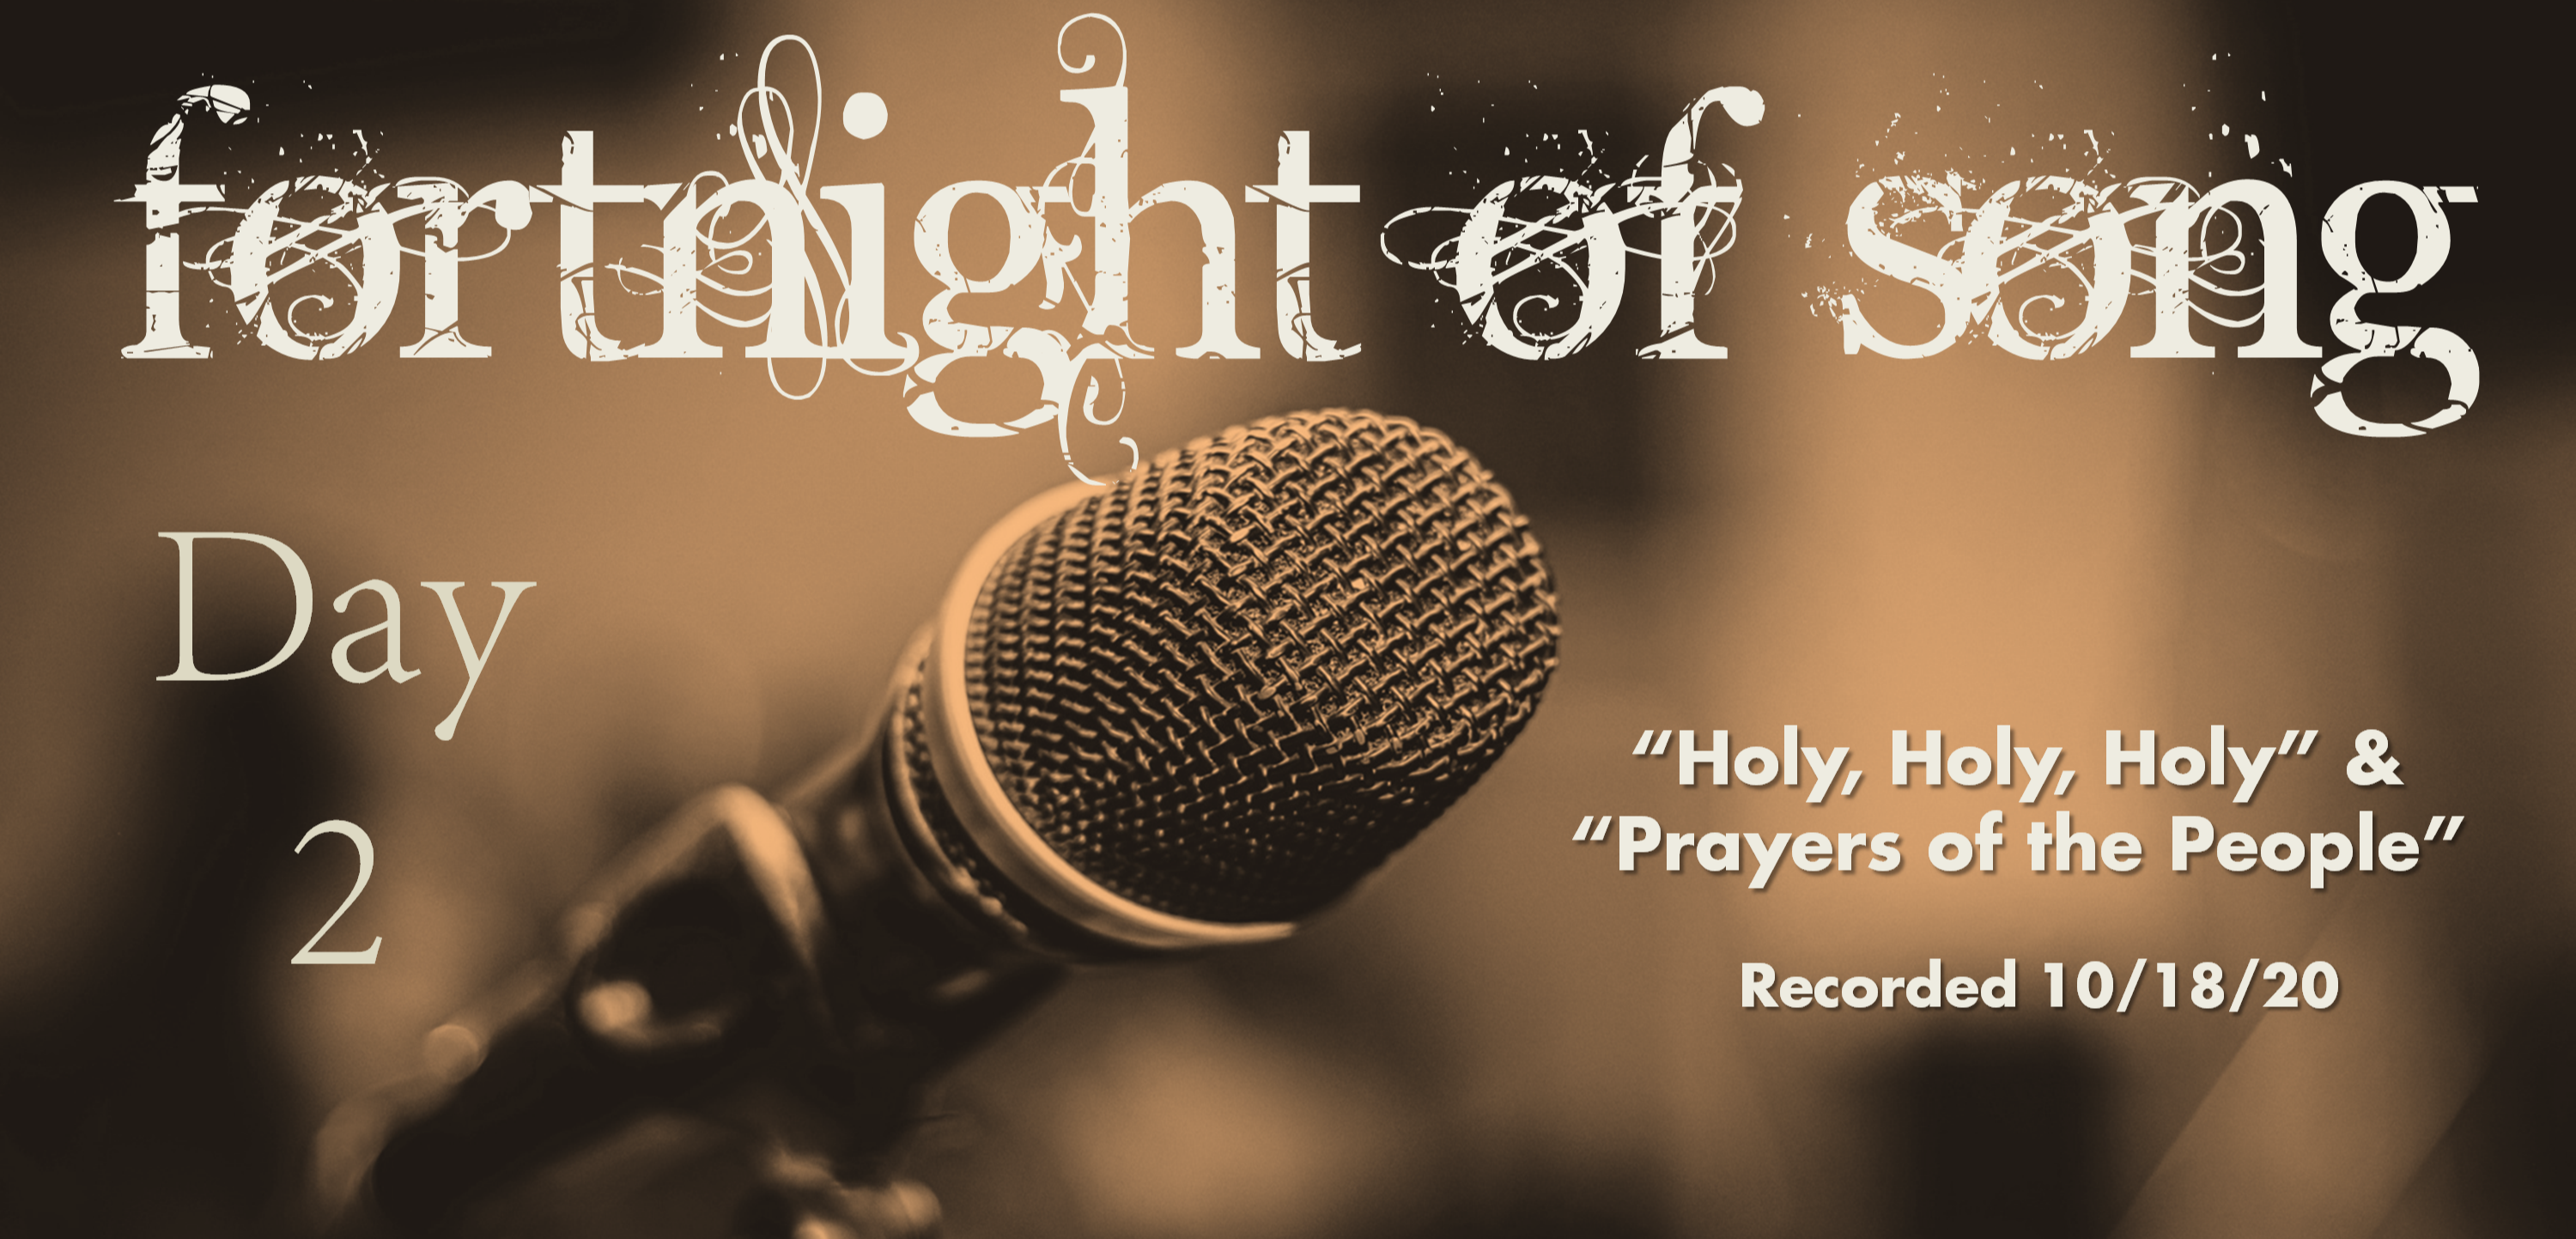 Fortnight of Song Day 2 - "Holy,Holy,Holy"/"Prayers of the People"